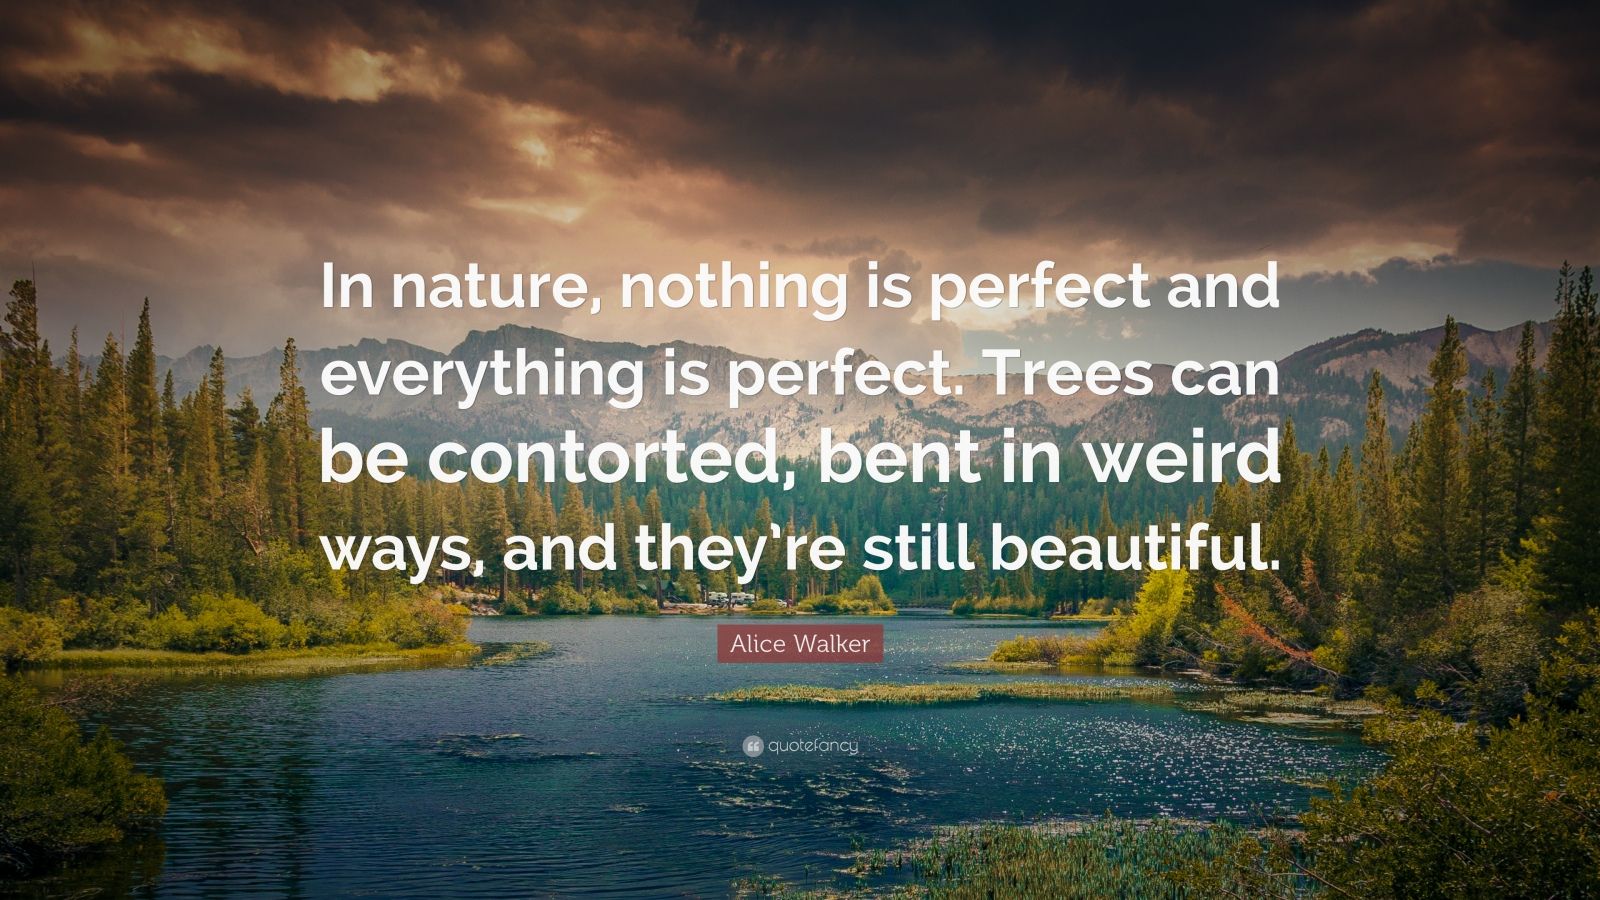 Alice Walker Quote: “In nature, nothing is perfect and everything is ...